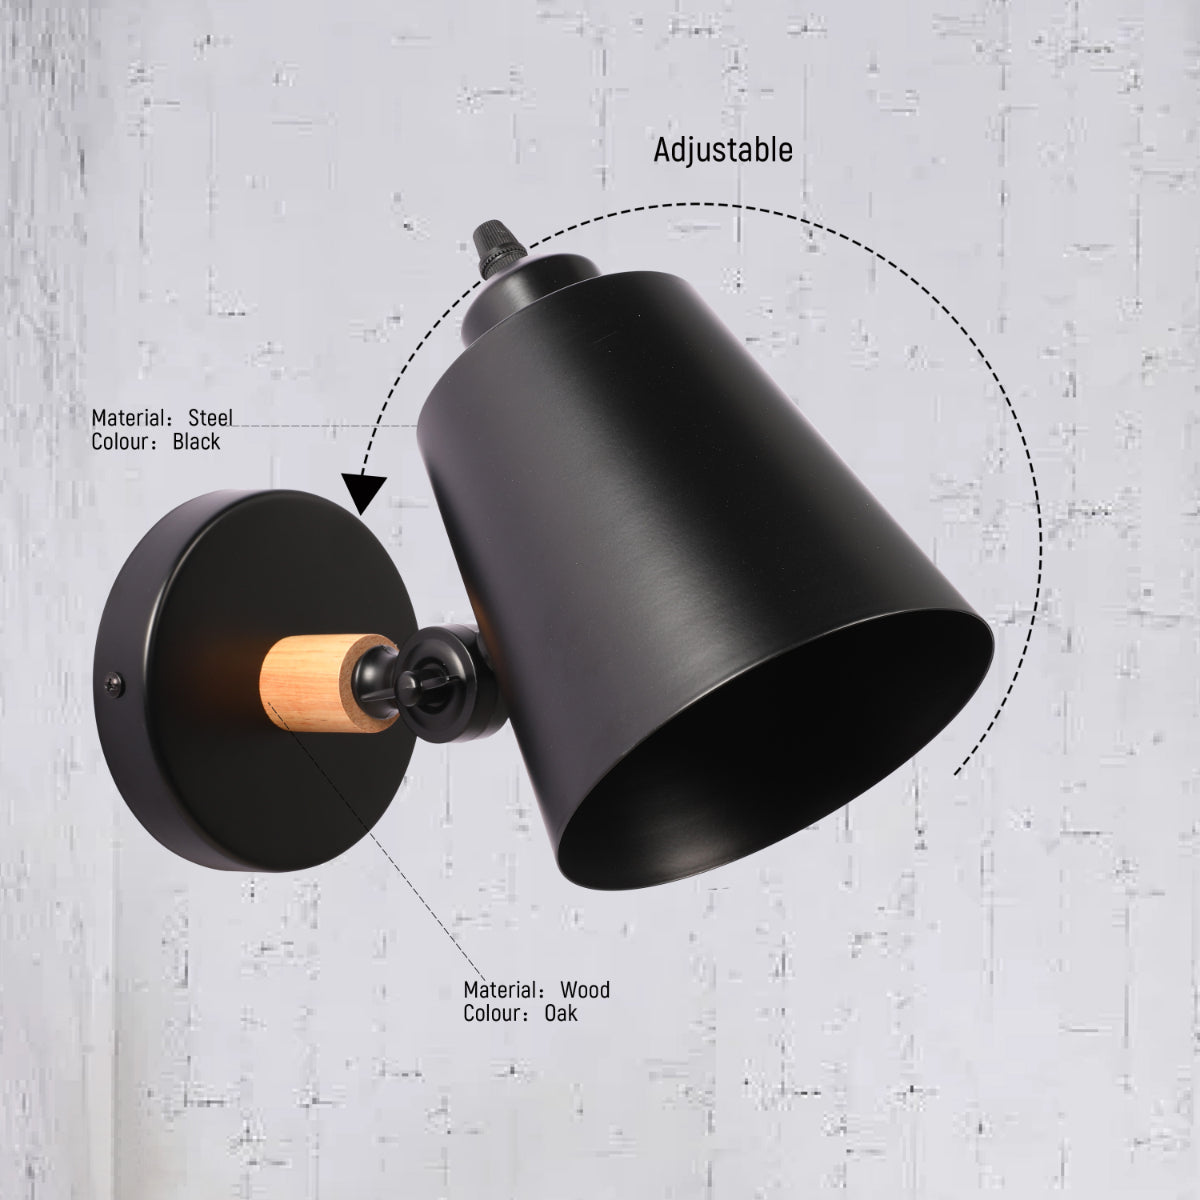 Close shots of Nordic Sleek Adjustable Wall Lamp - Modern Tapered Cone Design in Black or White 151-03010